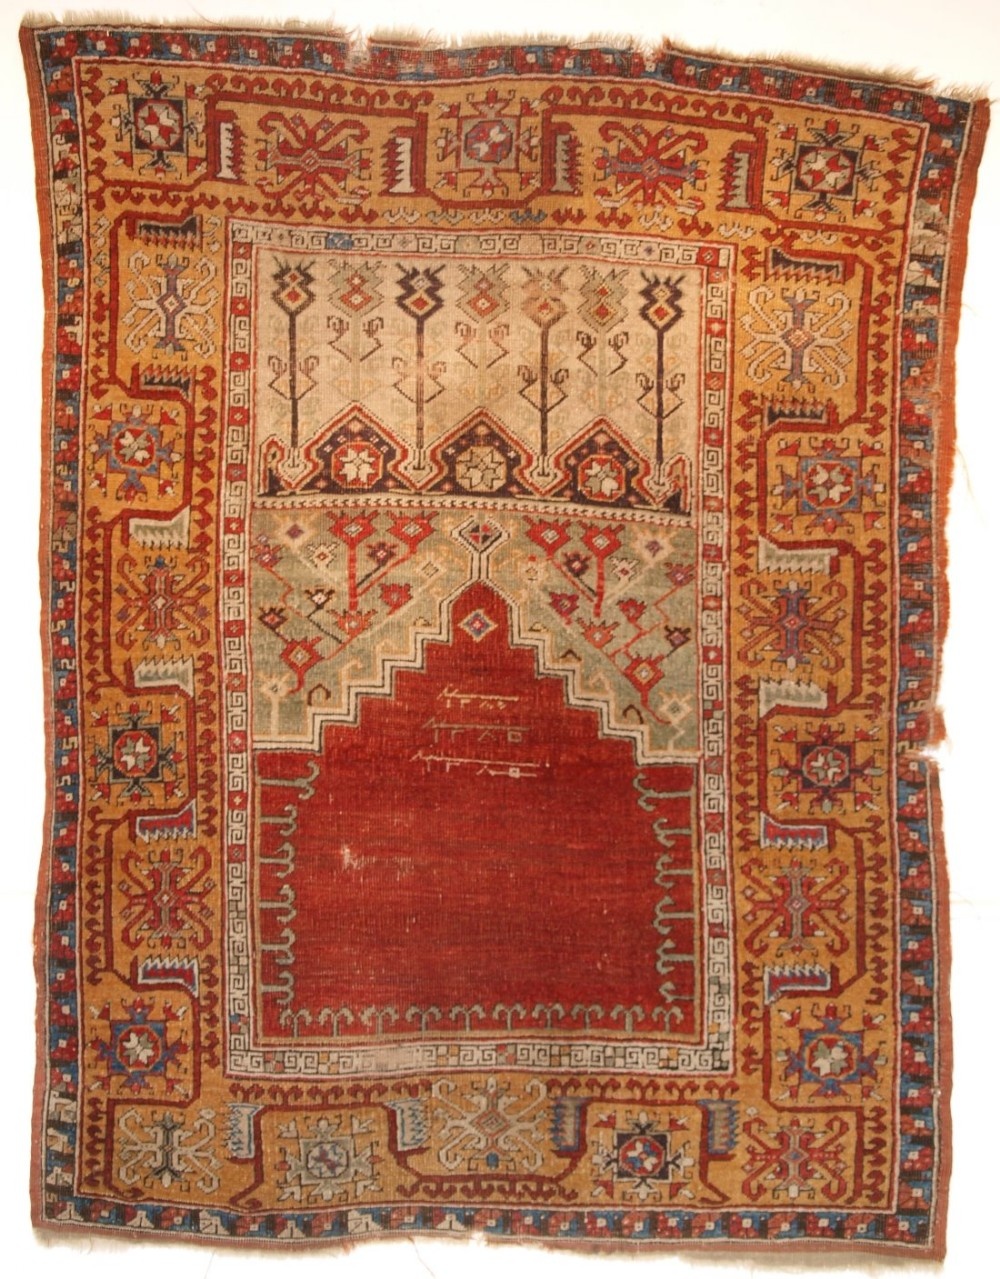 antique turkish ladik prayer rug dated 3 times 1285 1868 superb early example